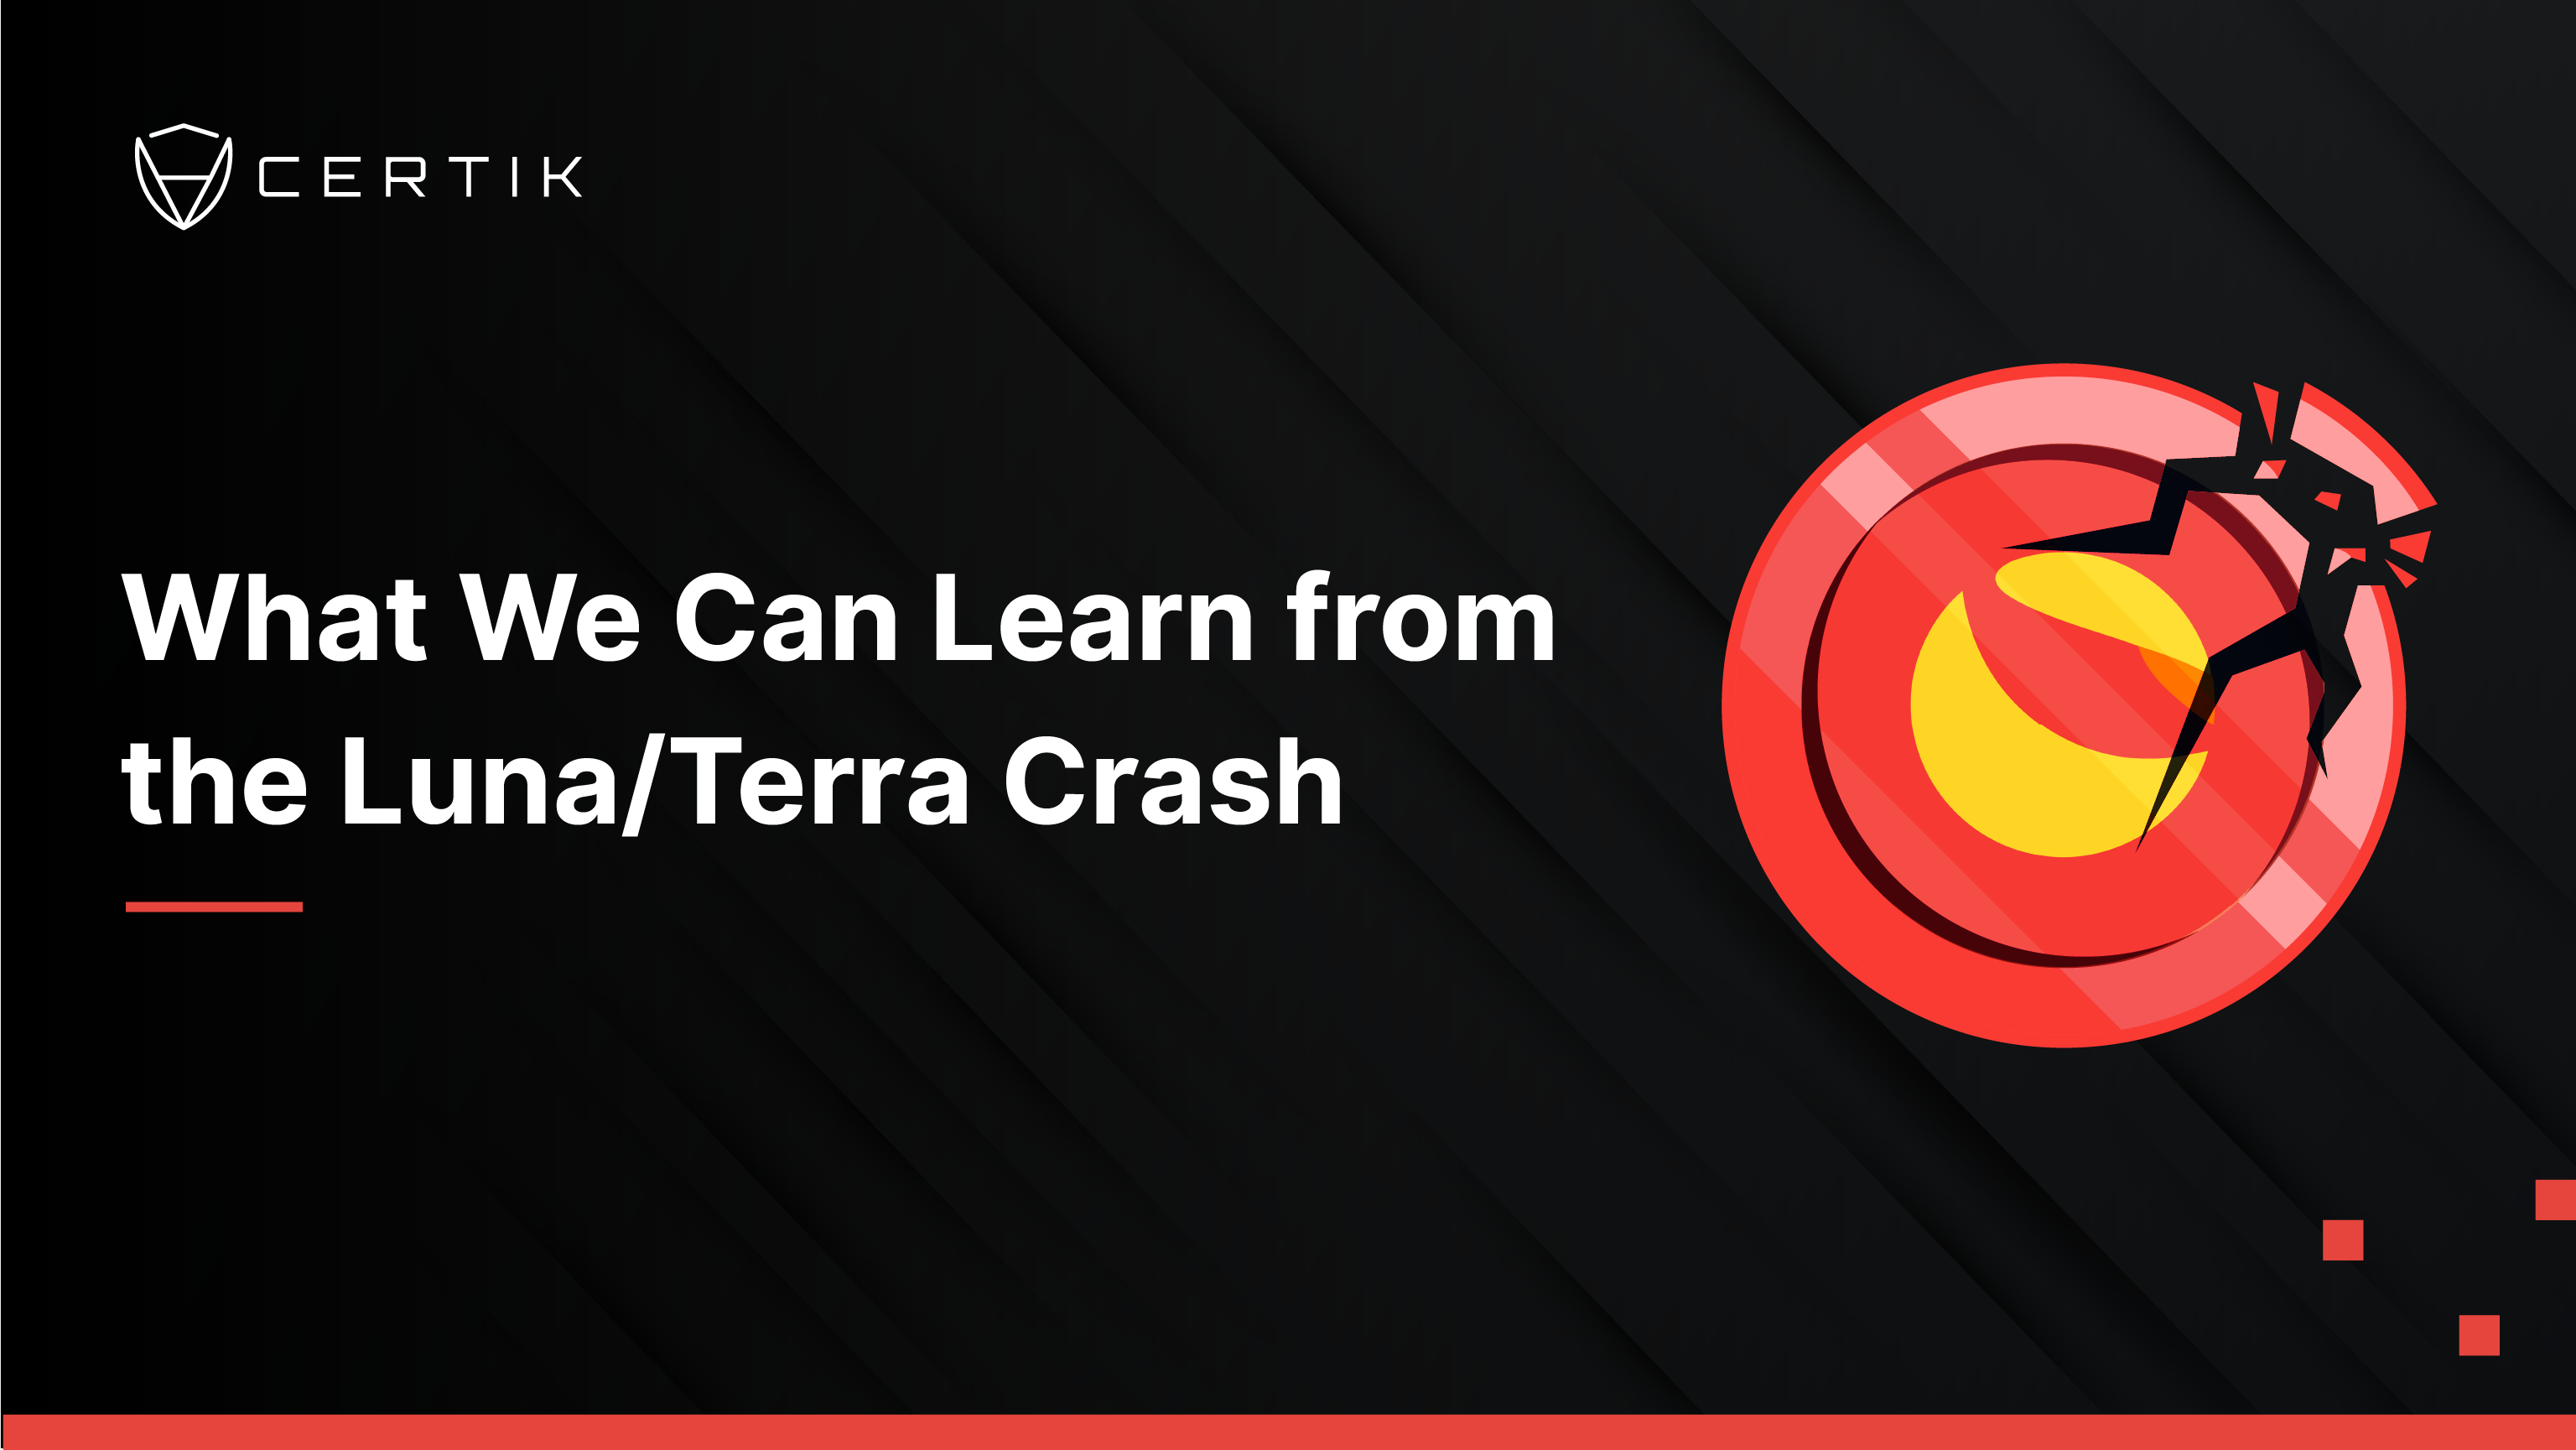 What Can We Learn from the Luna/Terra Crash?